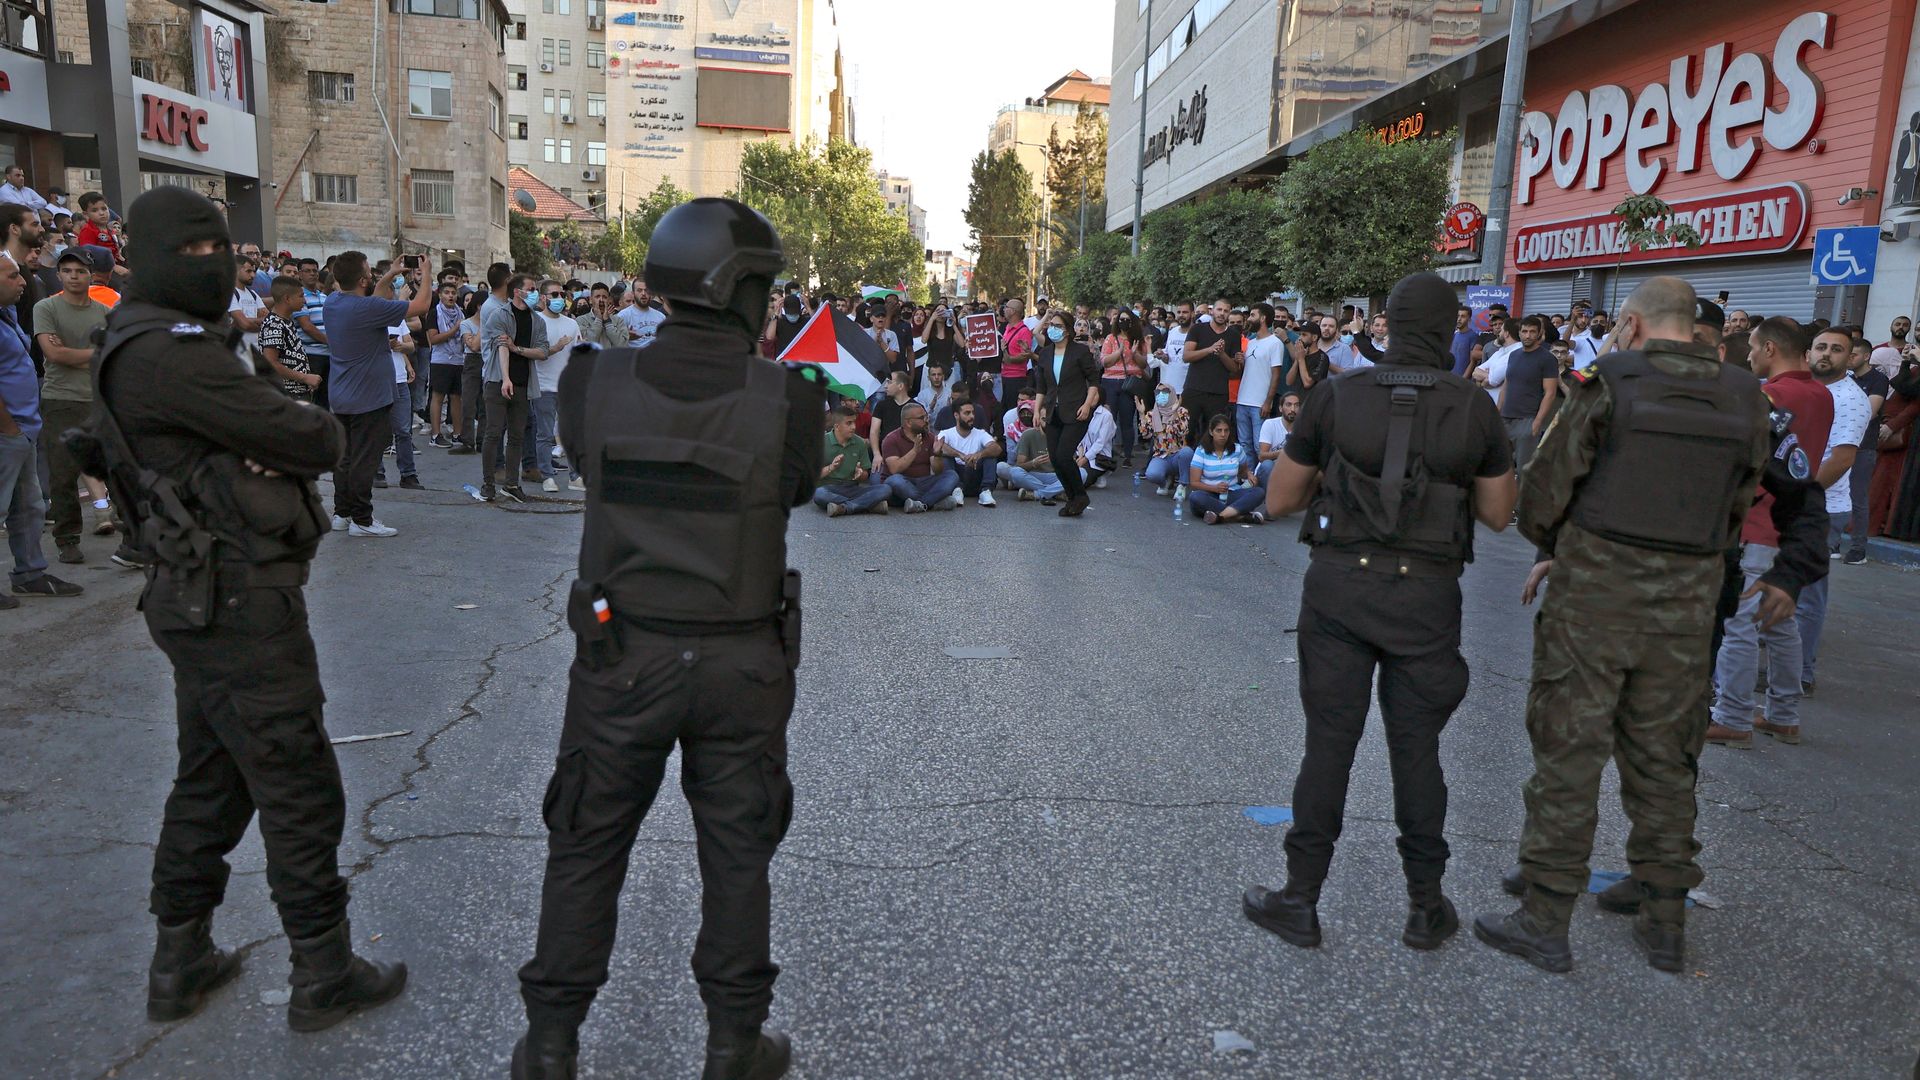 Palestinian security forces deploy as demonstrators rally in Ramallah city in the occupied West Bank on July 3, 2021